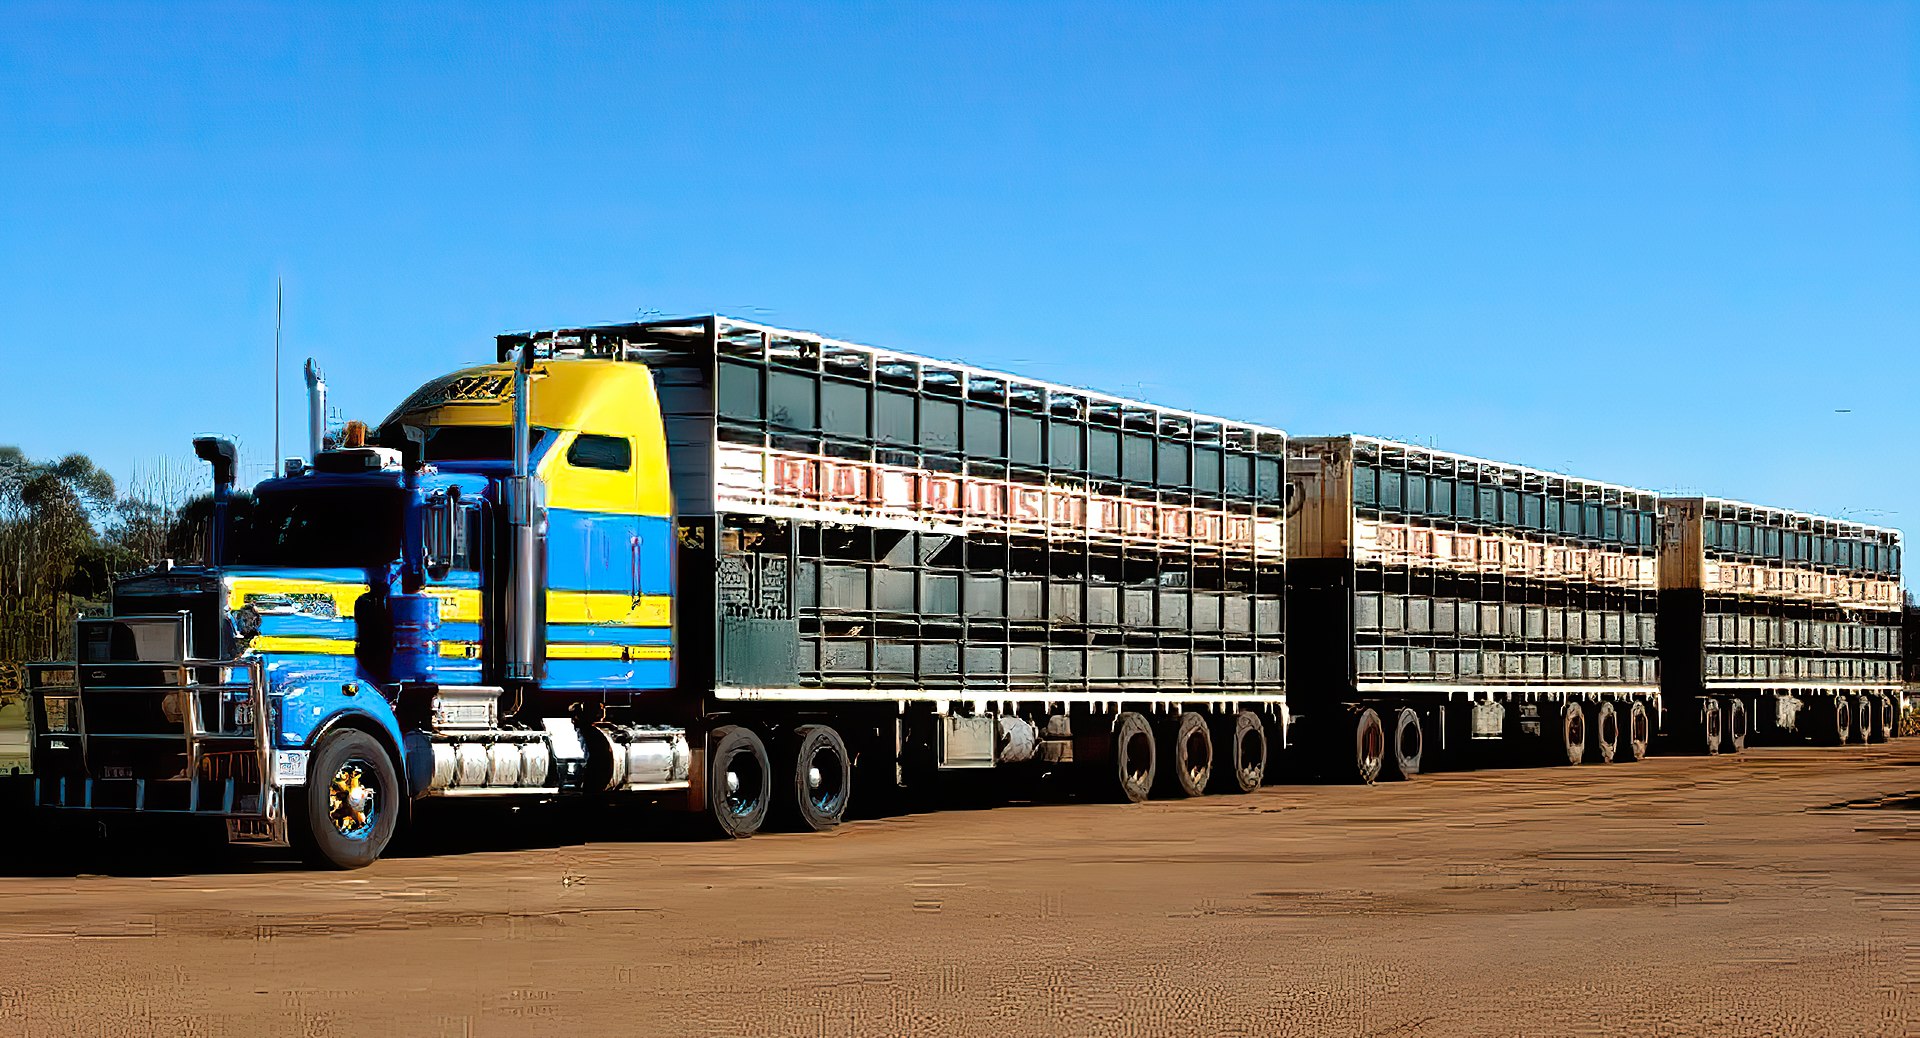 The Road Train is that singular Australian innovation which overcame the Australian tyranny of distance.